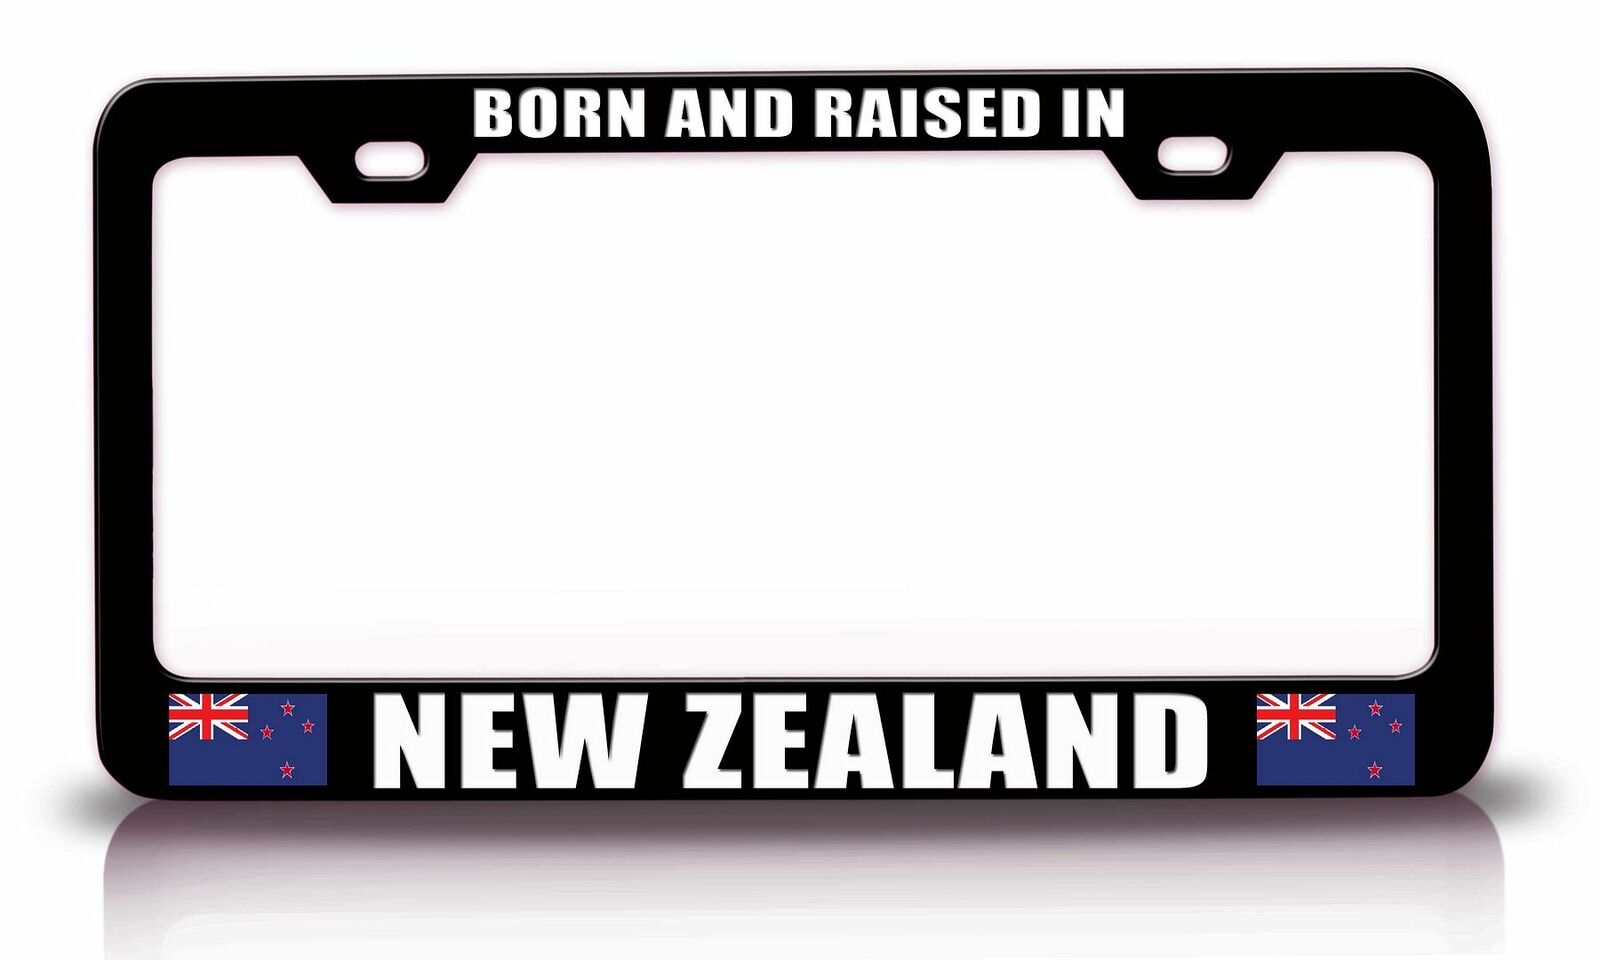 BORN AND RAISED IN NEW ZEALAND Steel License Plate Frame Car SUV m94